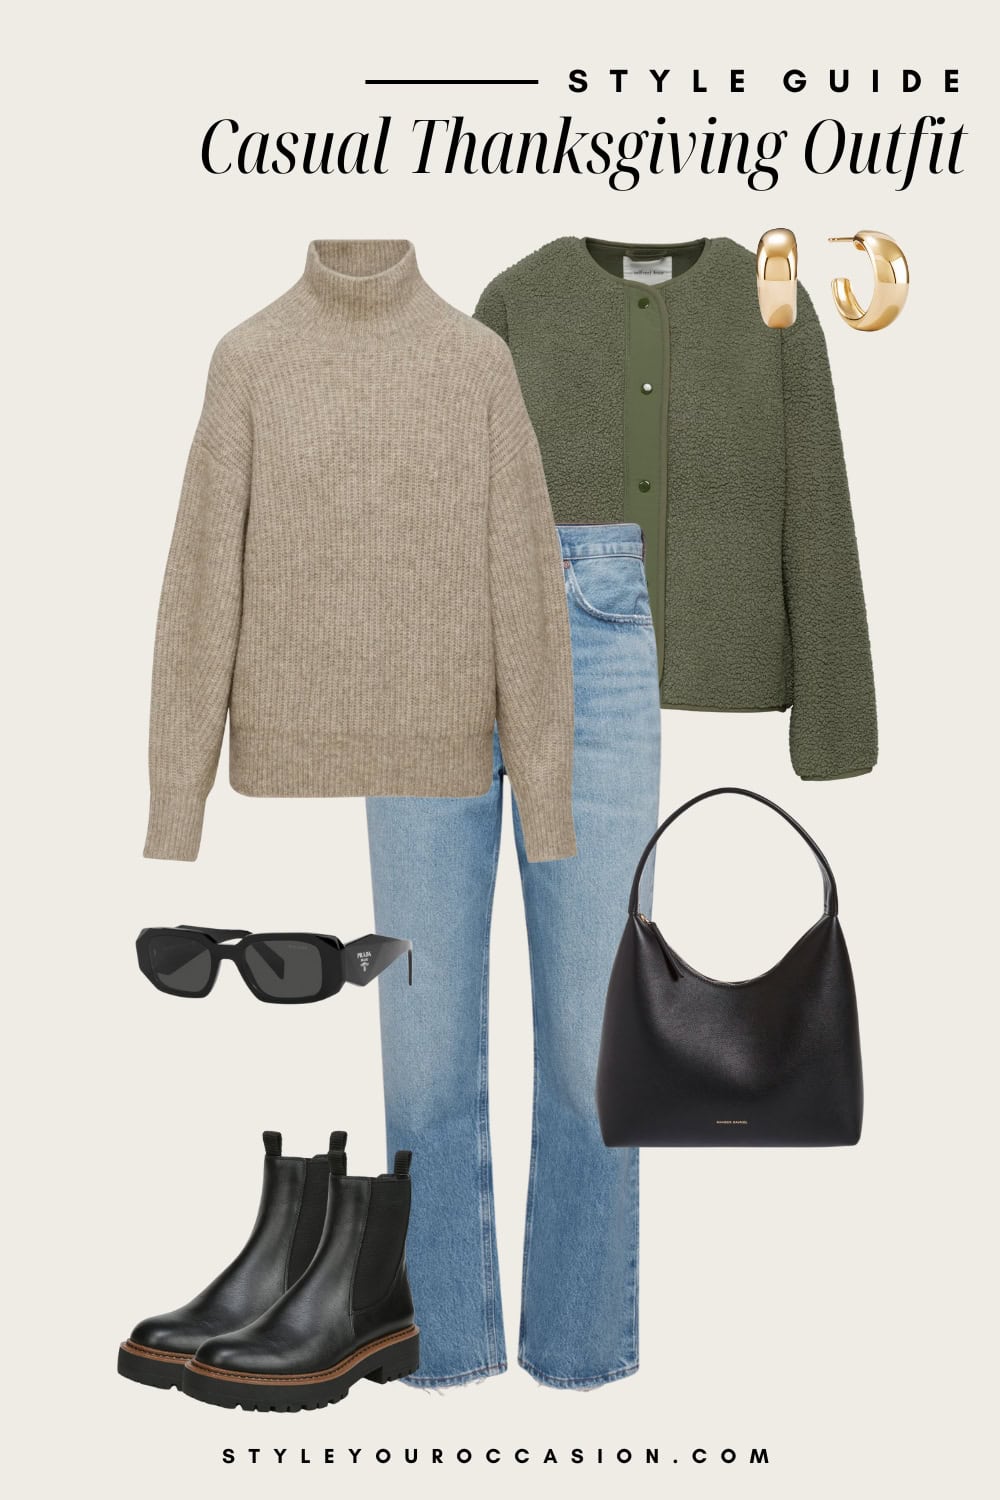 Flat lay outfit graphic of jeans, a turtleneck sweater, a sherpa jacket and chelsea boots.